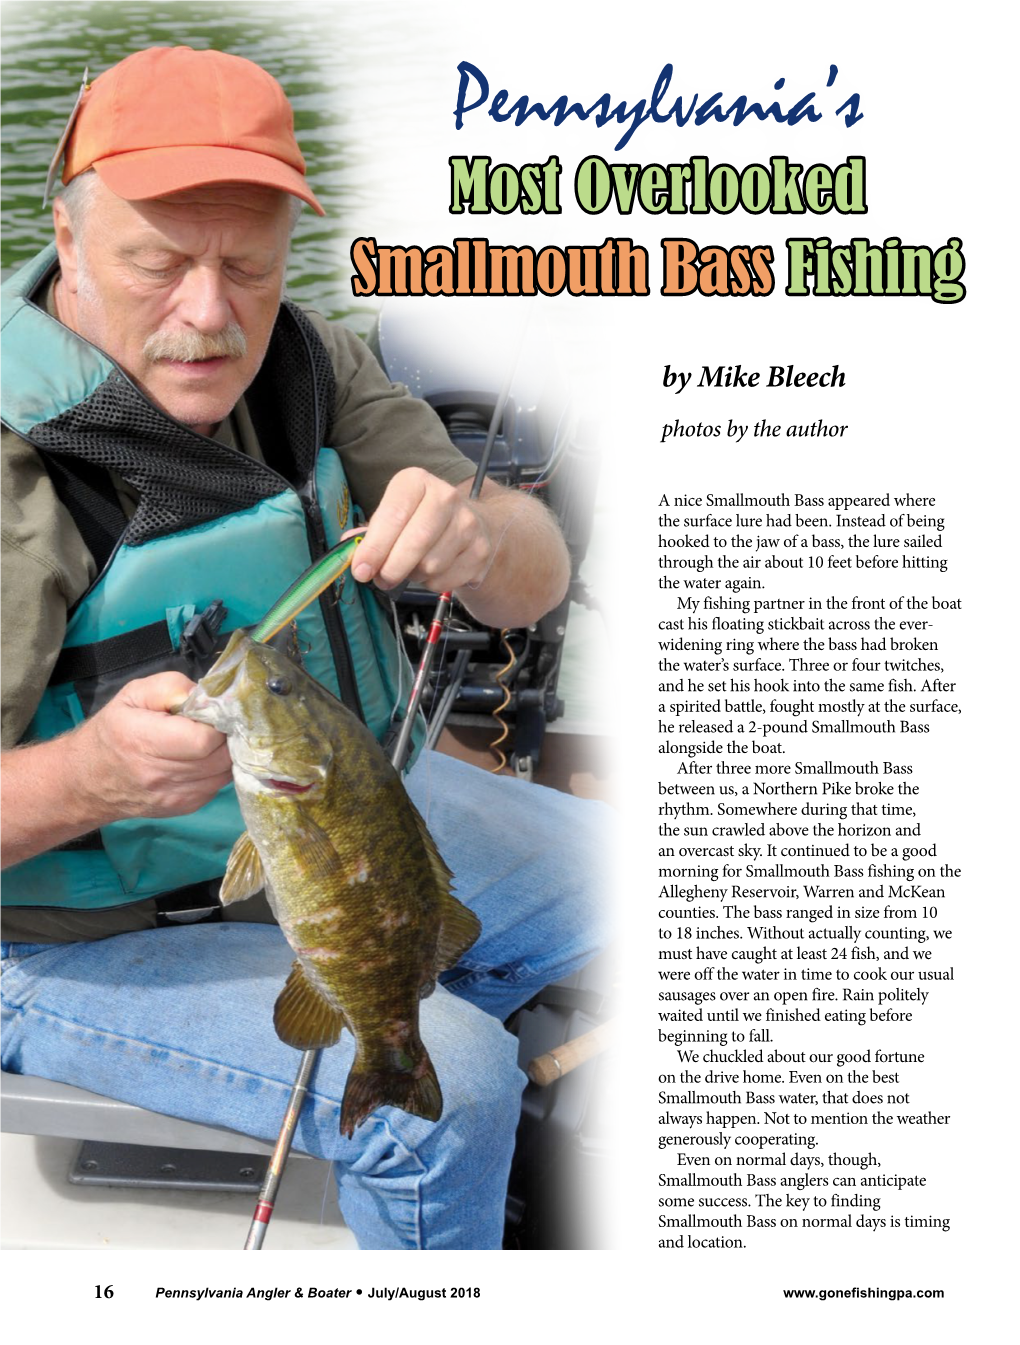 Pennsylvania's Most Overlooked Smallmouth Bass Fishing